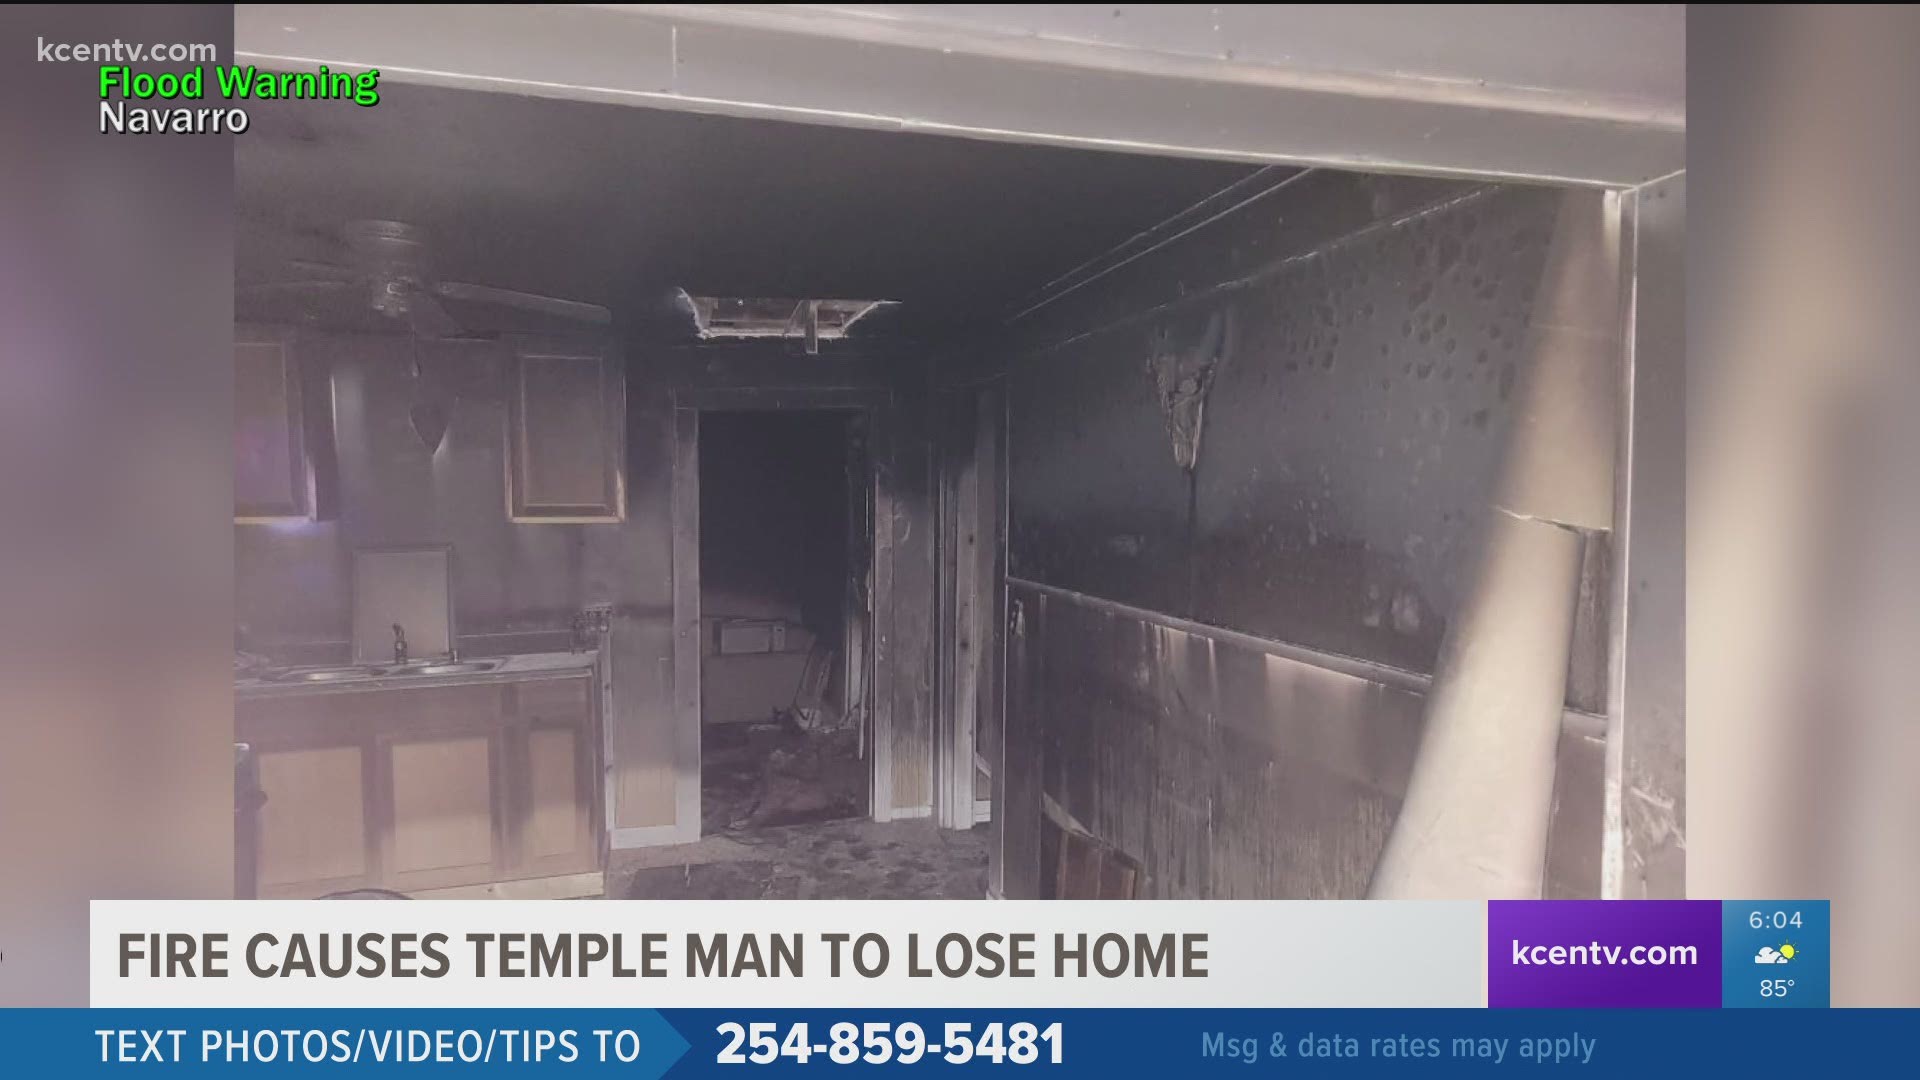 Temple Fire & Rescue say the fire happened just before 10 p.m. at 804 S. 10th Street. No injuries were reported.